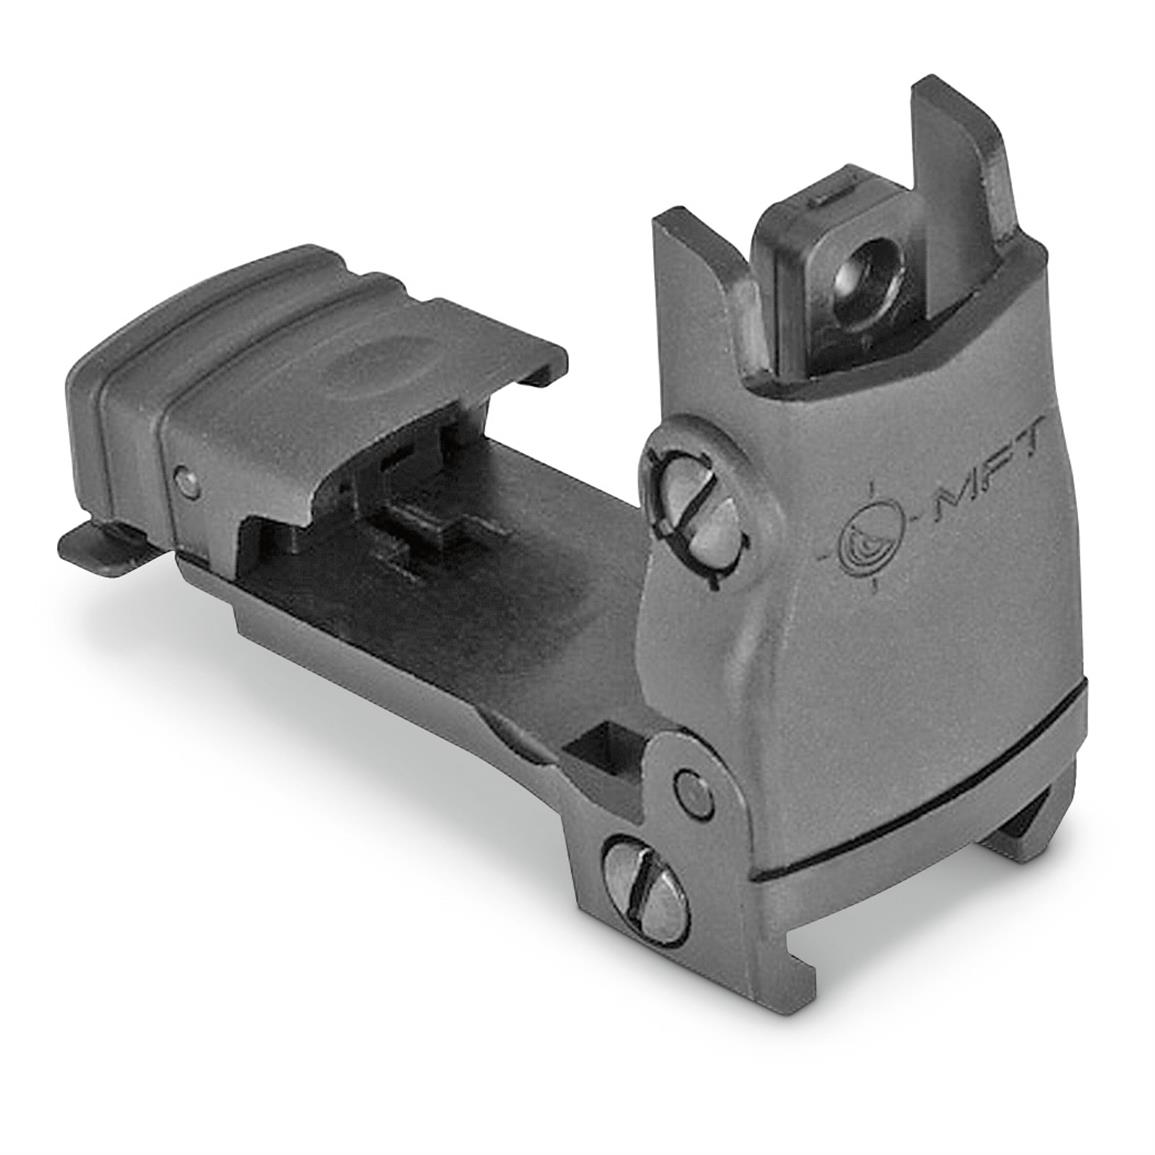 Mission First Tactical Flip Up Rear Sight Infinite Moa Ar